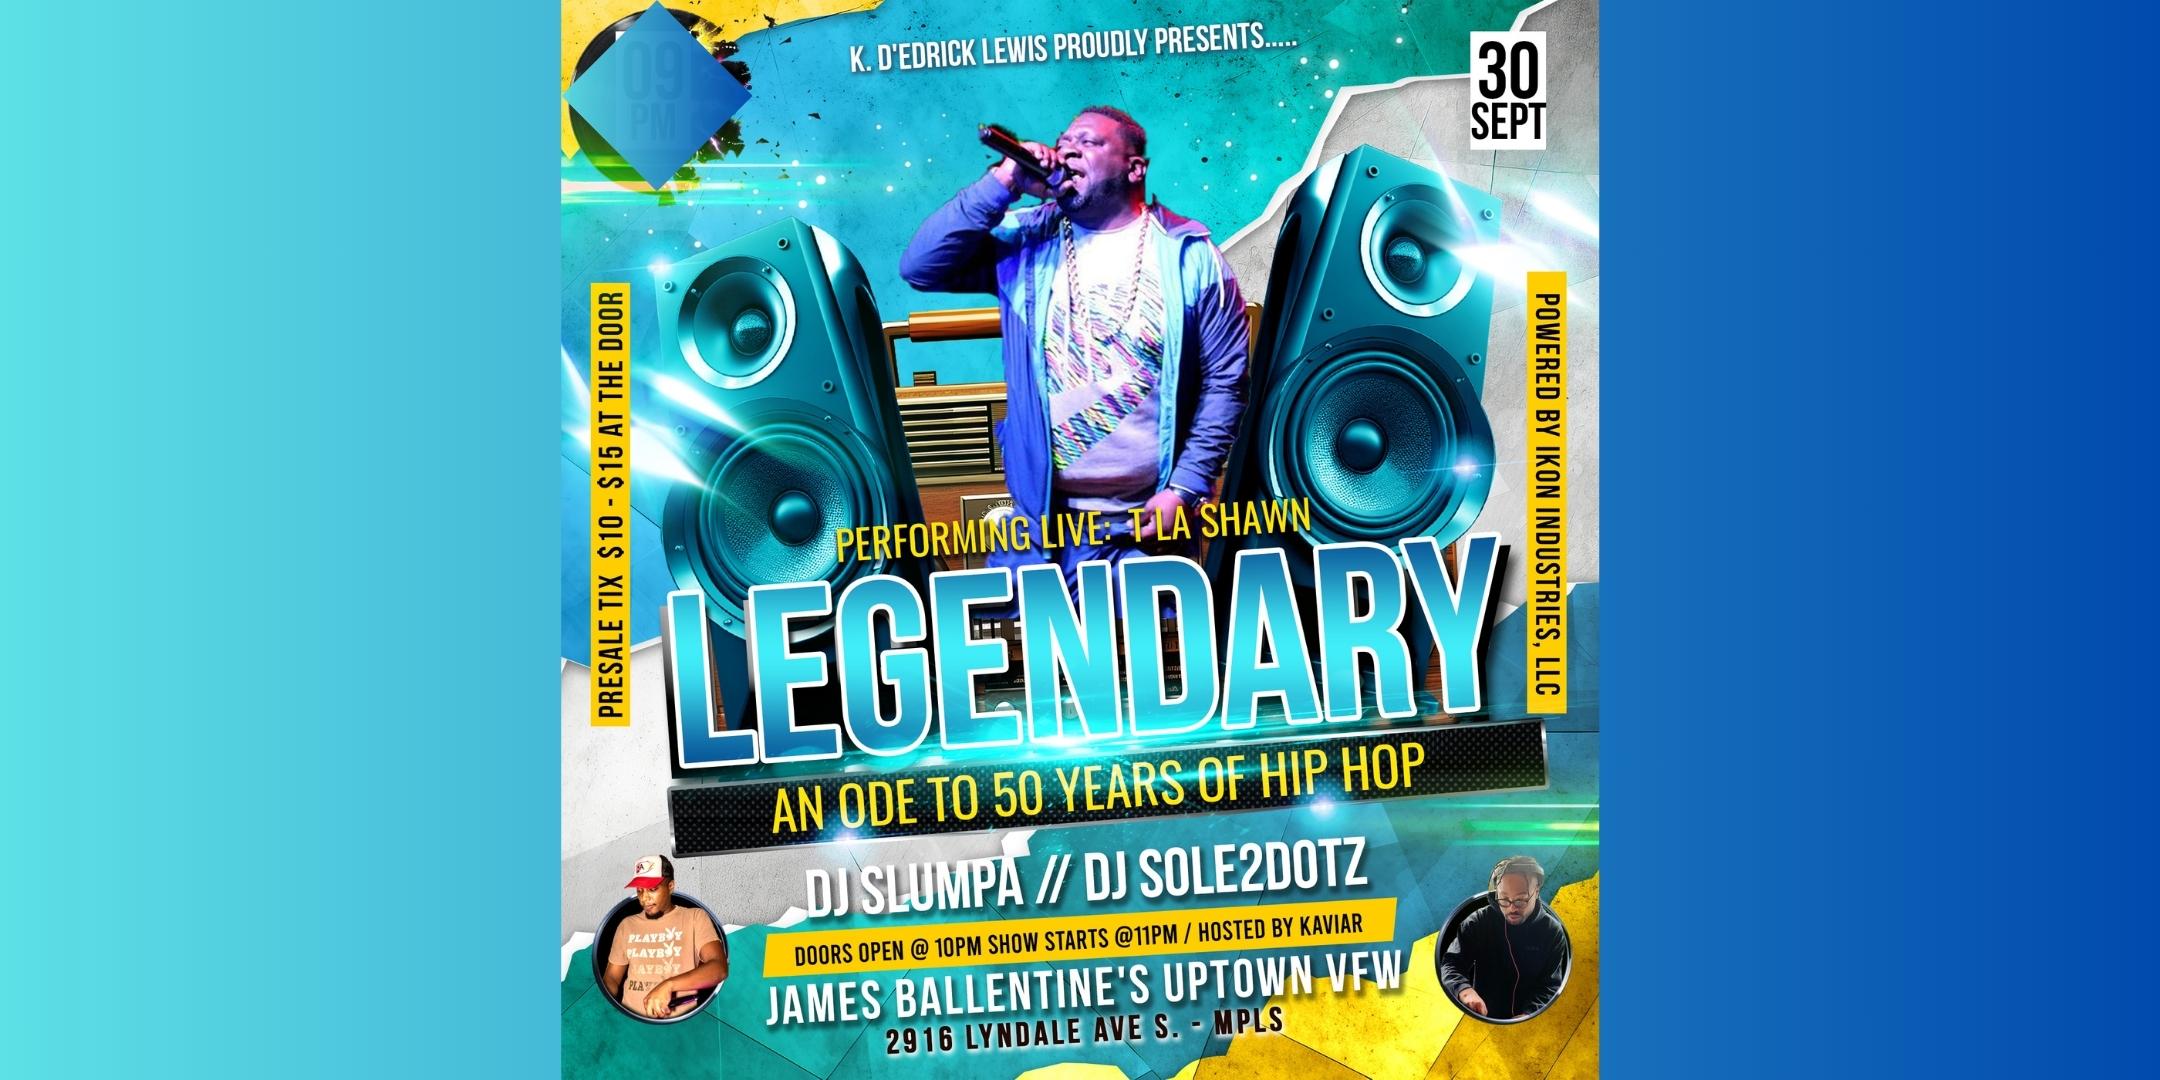 LEGENDARY - An Ode to 50 Years of Hip Hop Performances by T La Shawn Worldwide Chaos Karson Blu Yvng Audemar M33ch Orikal Uno Ken C Sole2dotz Saturday September 30 James Ballentine "Uptown" VFW Post 246 2916 Lyndale Ave S. Doors 10:00pm :: Music 10:00pm :: 21+ GA $10 ADV / $15 DOS Tickets On Sale Now